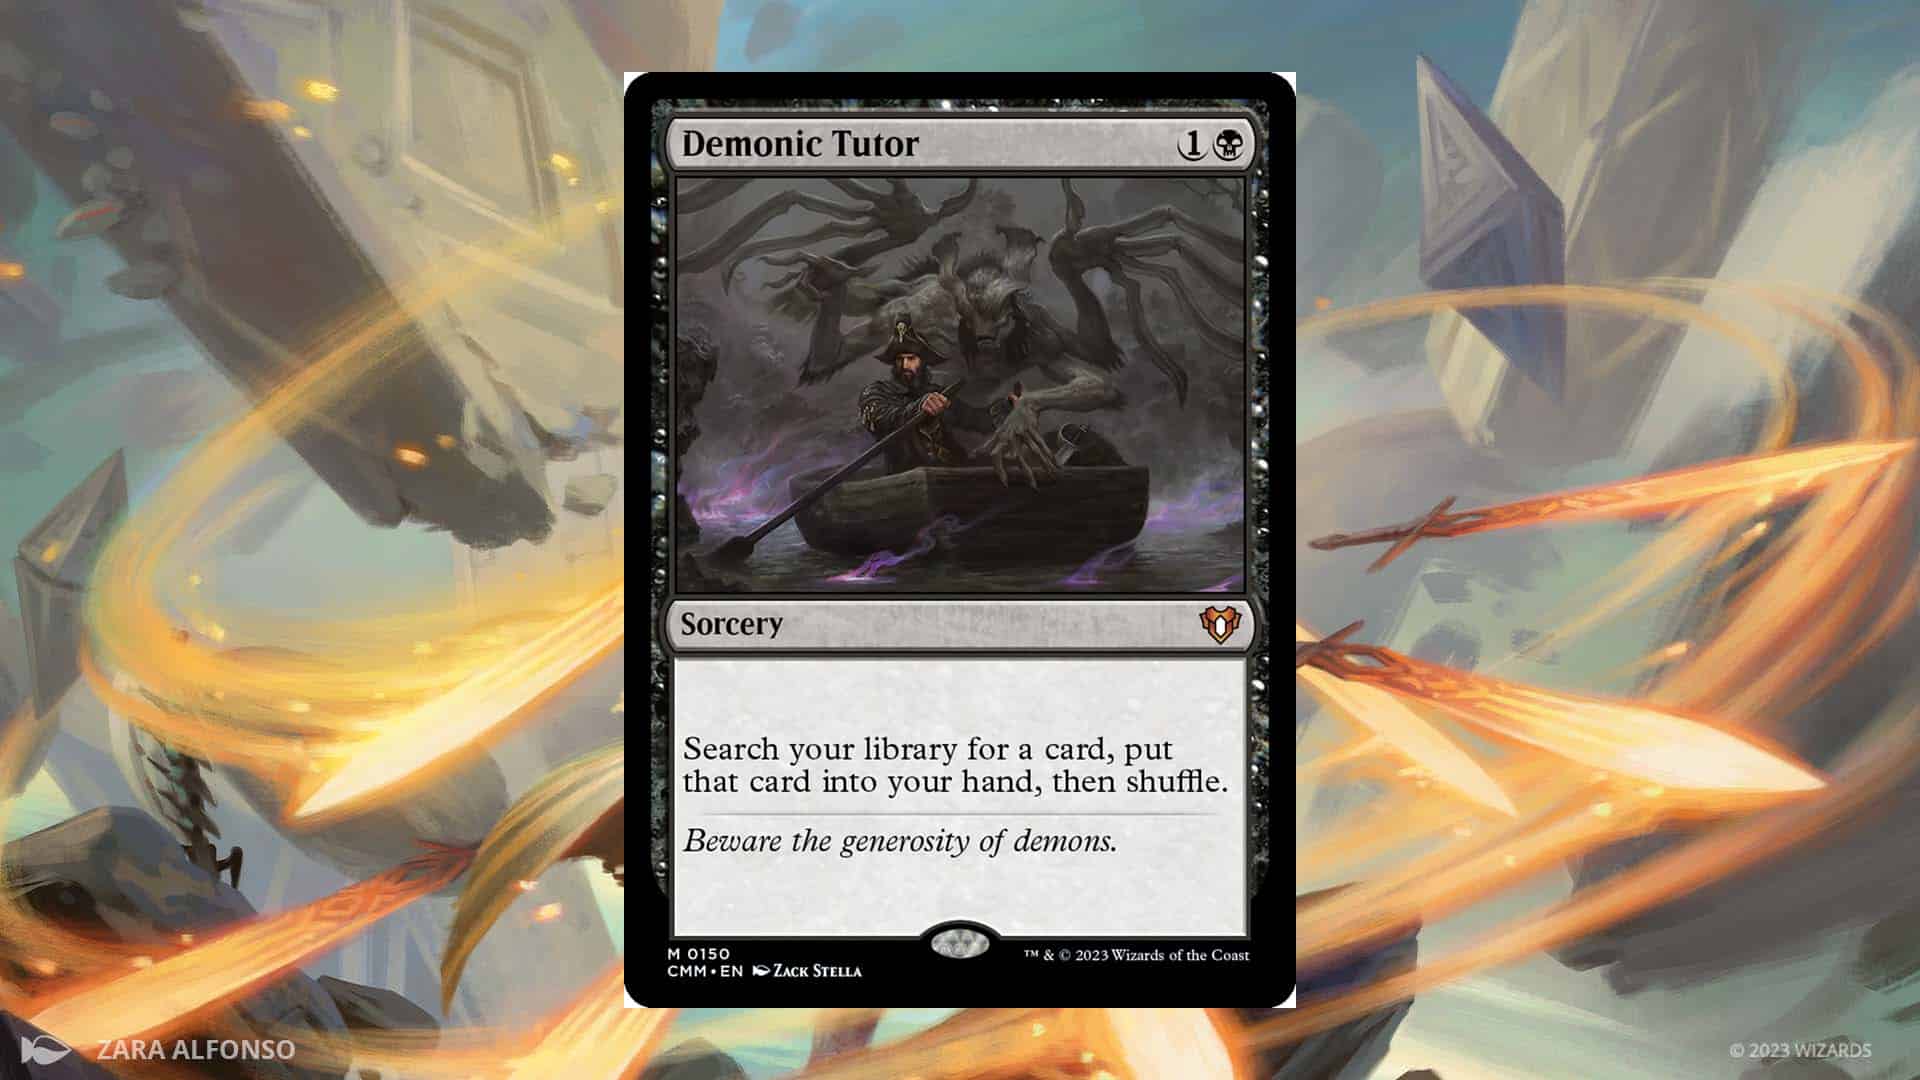 Picture of Demonic Tutor from Magic: the Gathering